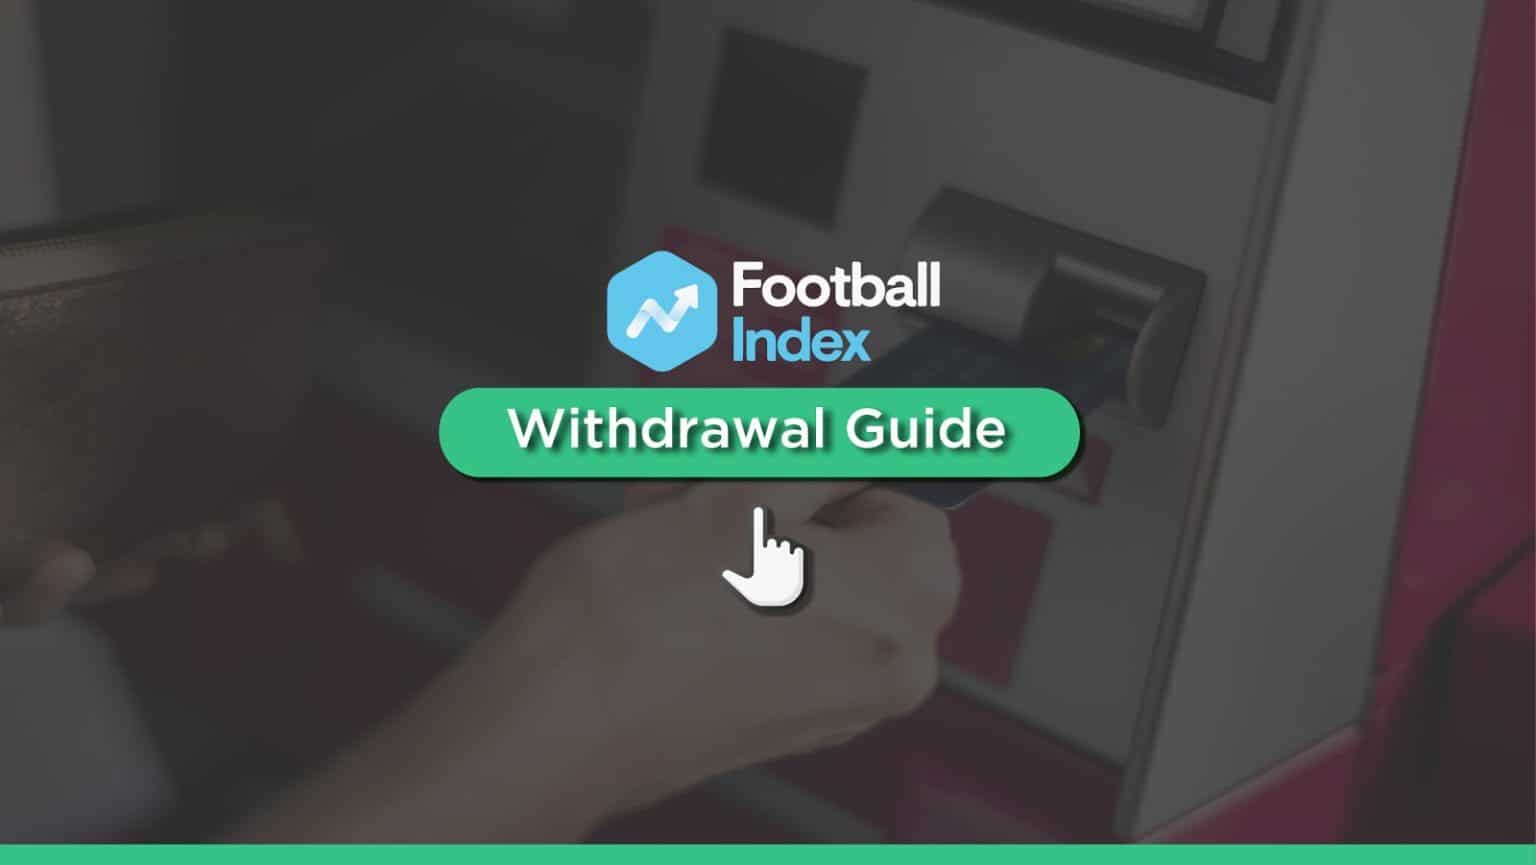 Football Index Withdrawal (Complete Guide) - AskTraders.com